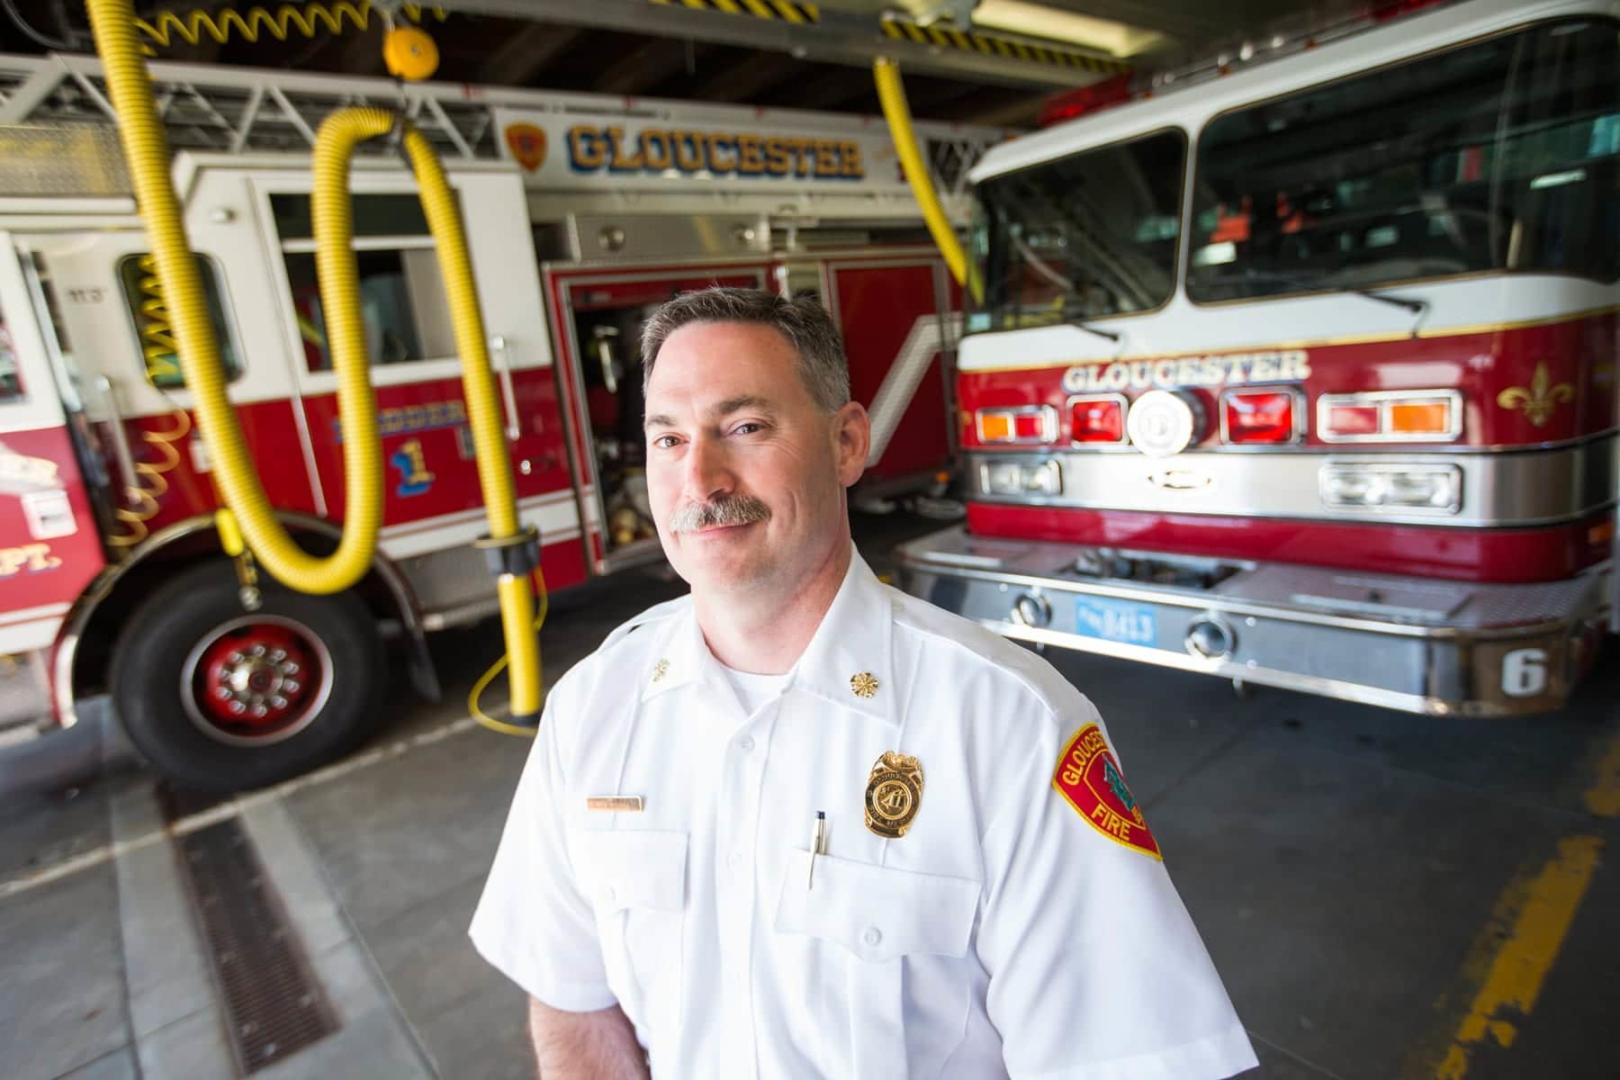 Gloucester Fire Chief Eric Smith